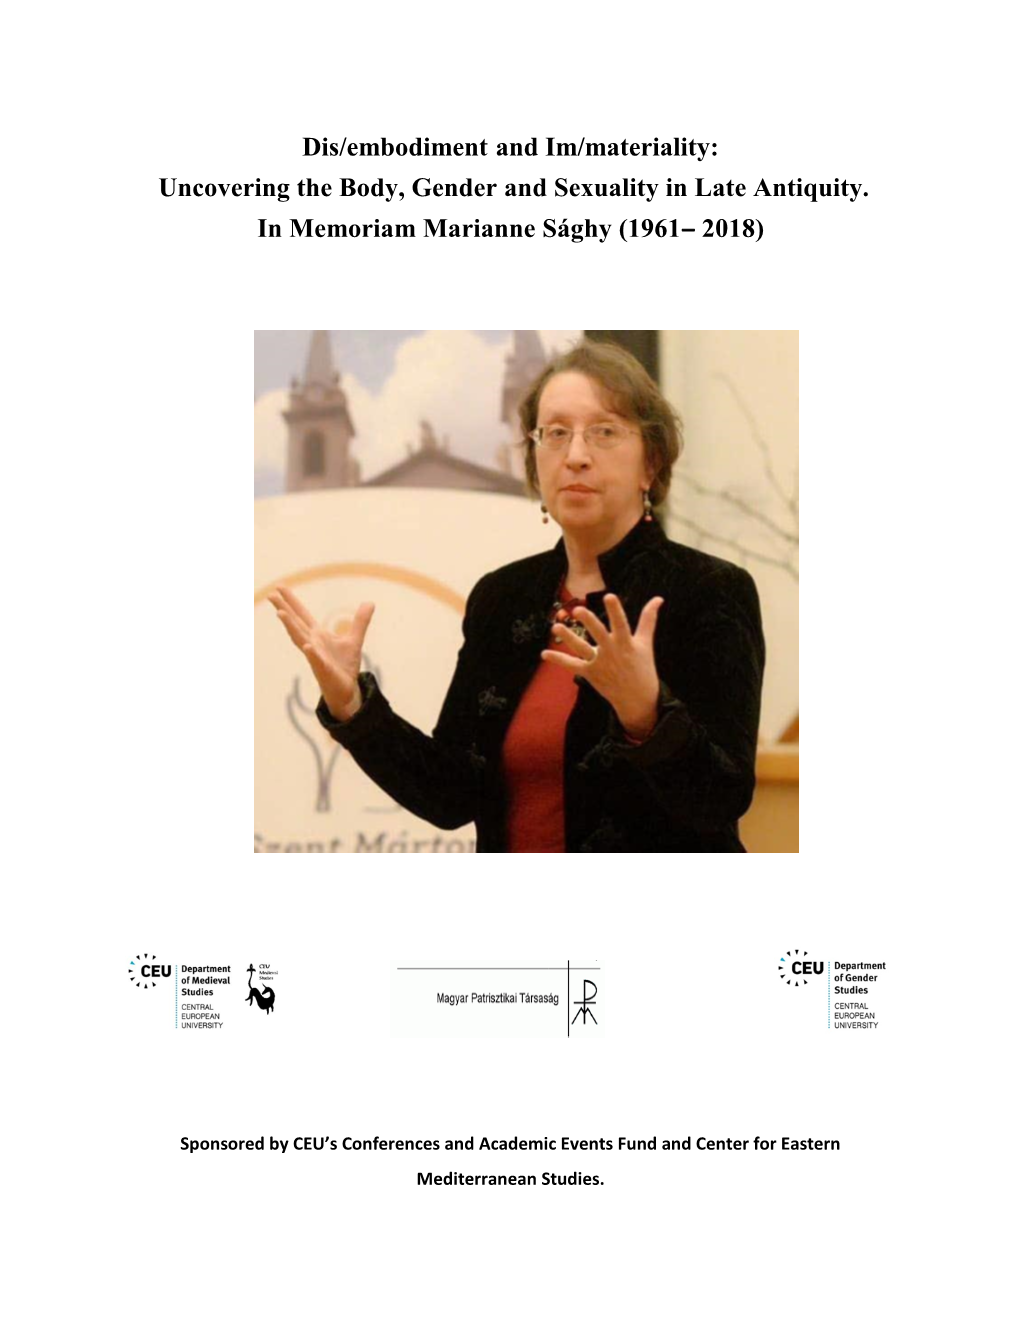 Uncovering the Body, Gender and Sexuality in Late Antiquity. in Memoriam Marianne Sághy (1961‒ 2018)